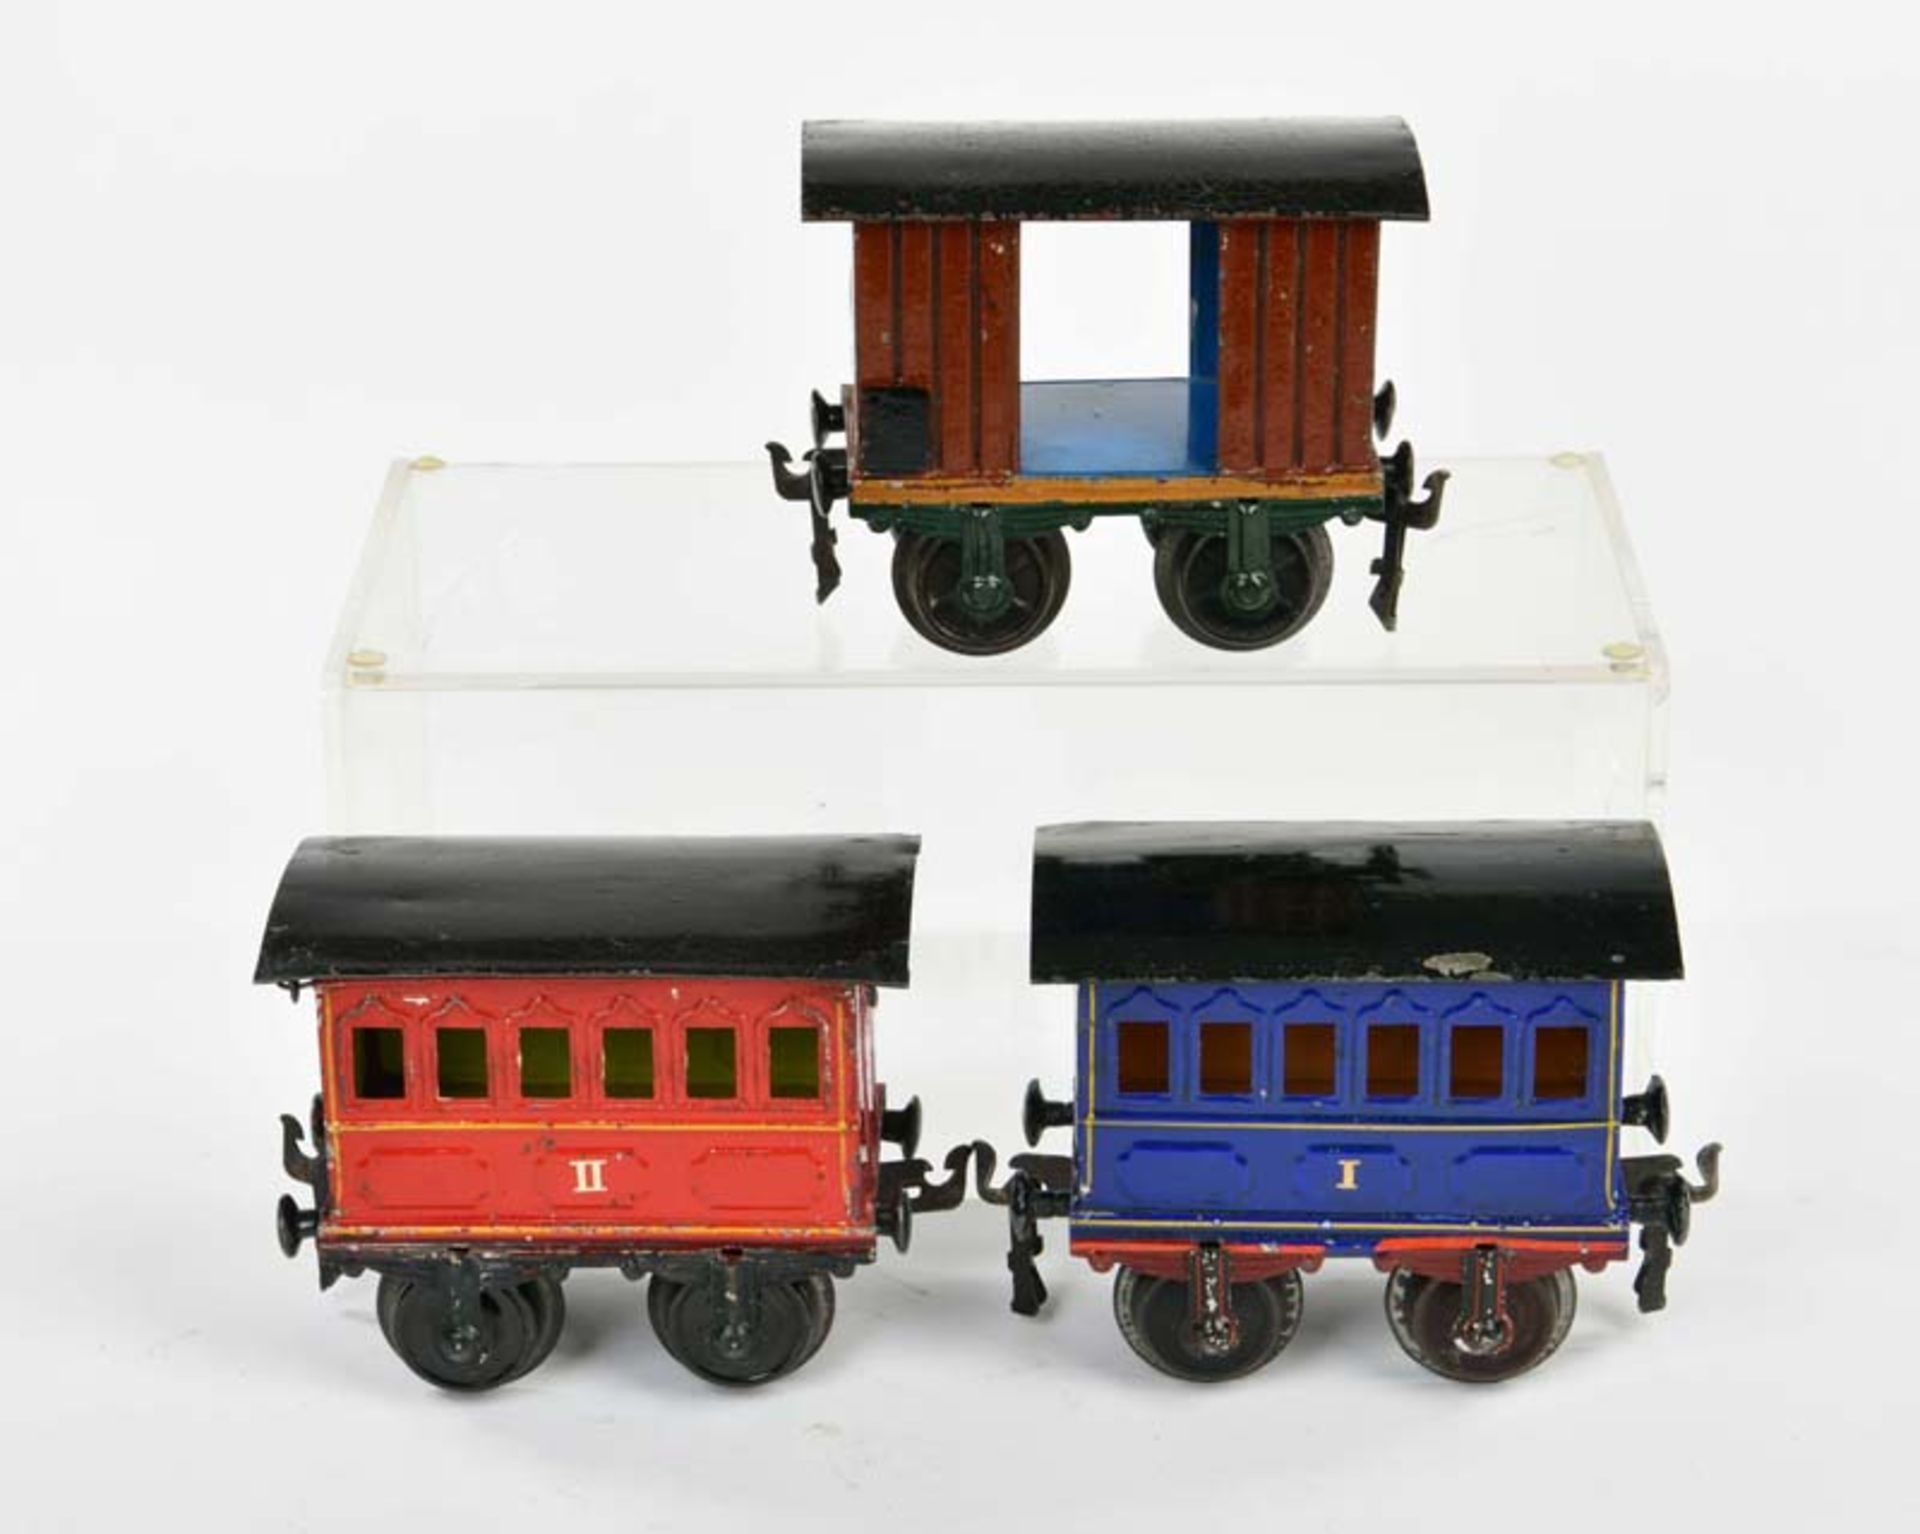 Märklin, 3 wagons gauge 1, Germany pw, 2 wagons refinished, otherwise good condition - Image 2 of 2